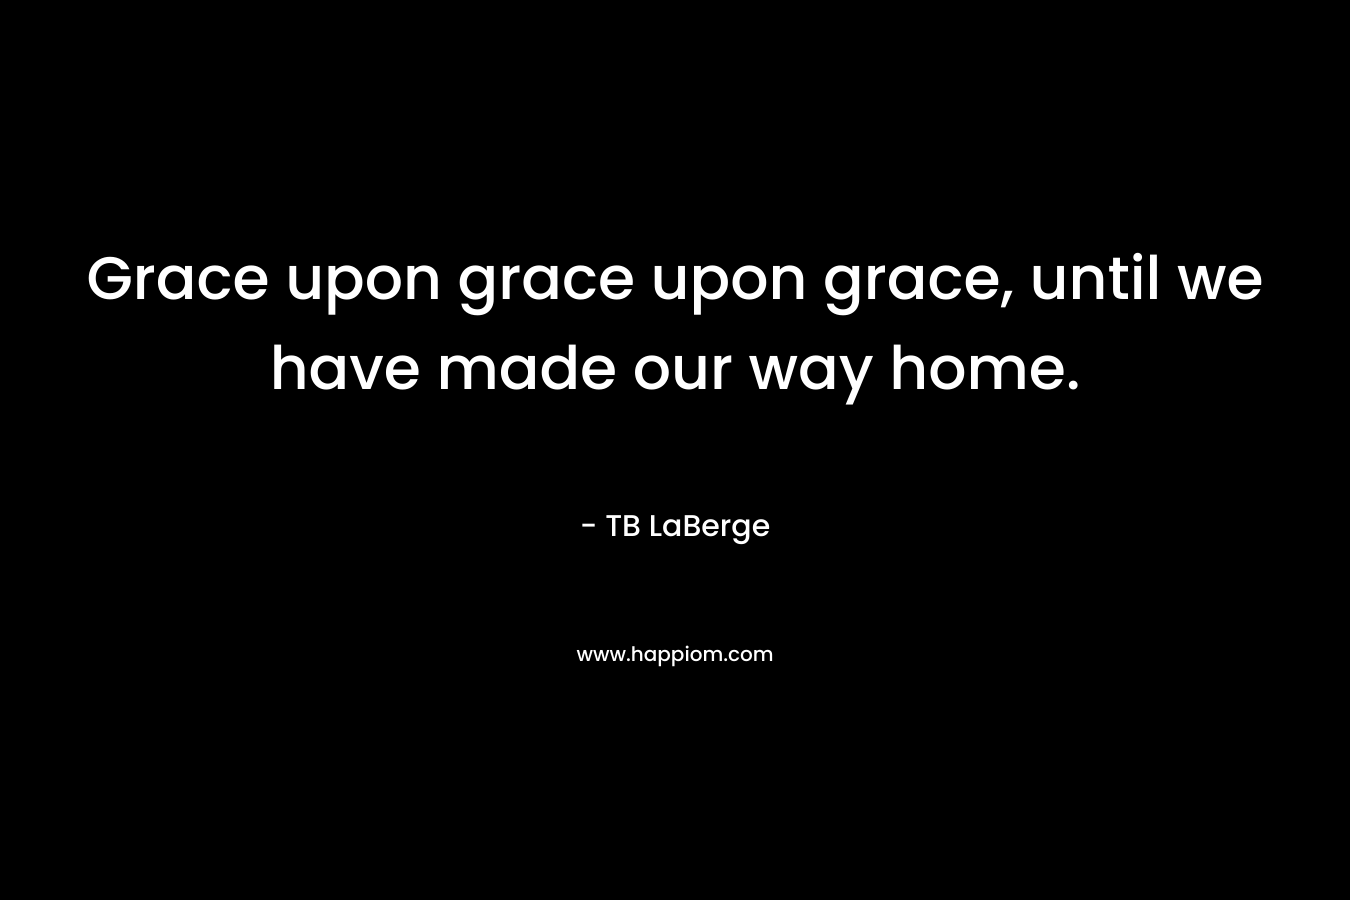 Grace upon grace upon grace, until we have made our way home. – TB LaBerge